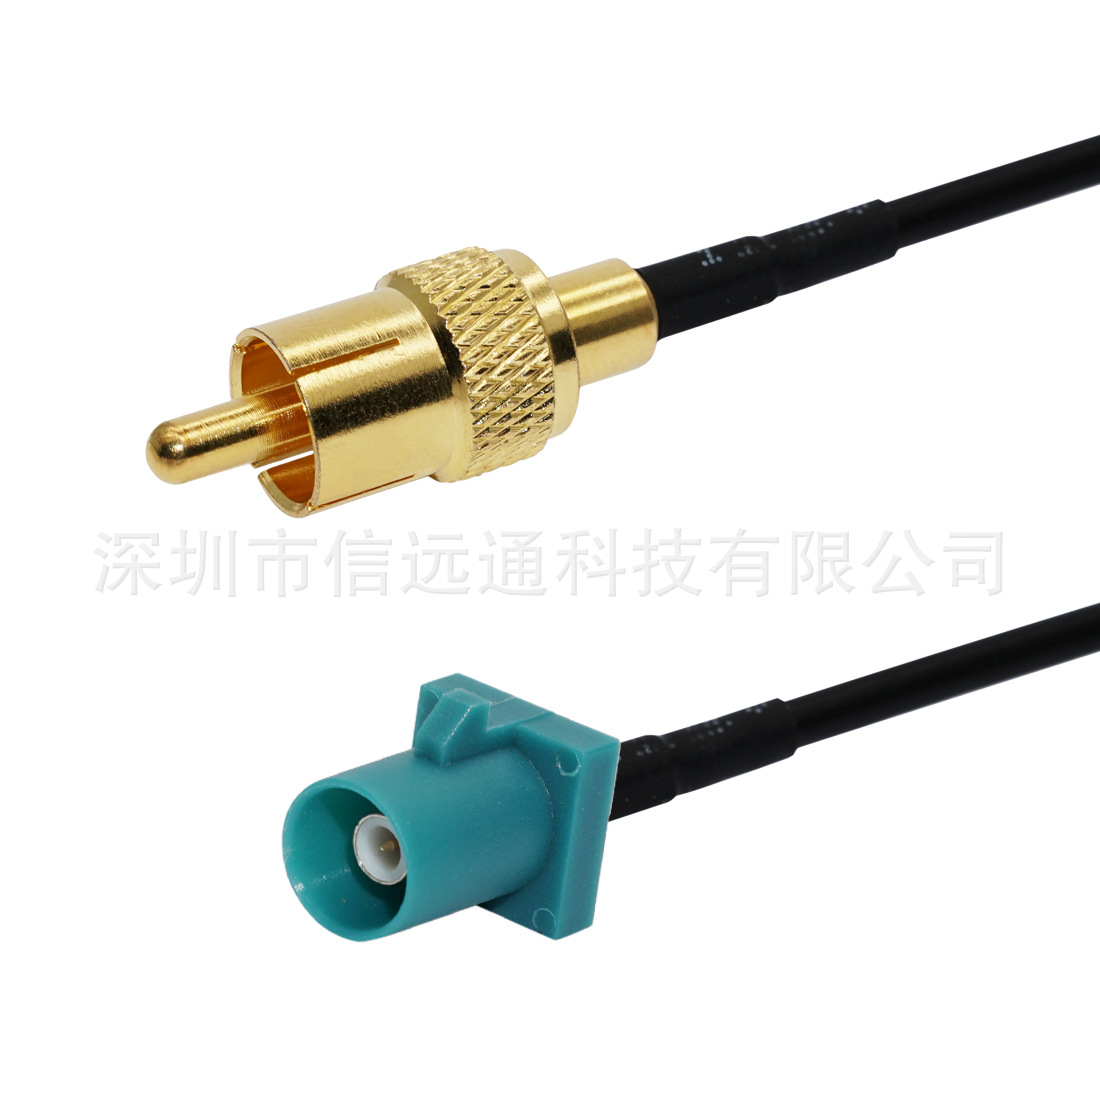 coaxial radio frequency Adapter cable Radio FAKRAZ Type head turn Cinch RCA Male head Audio adapter cable